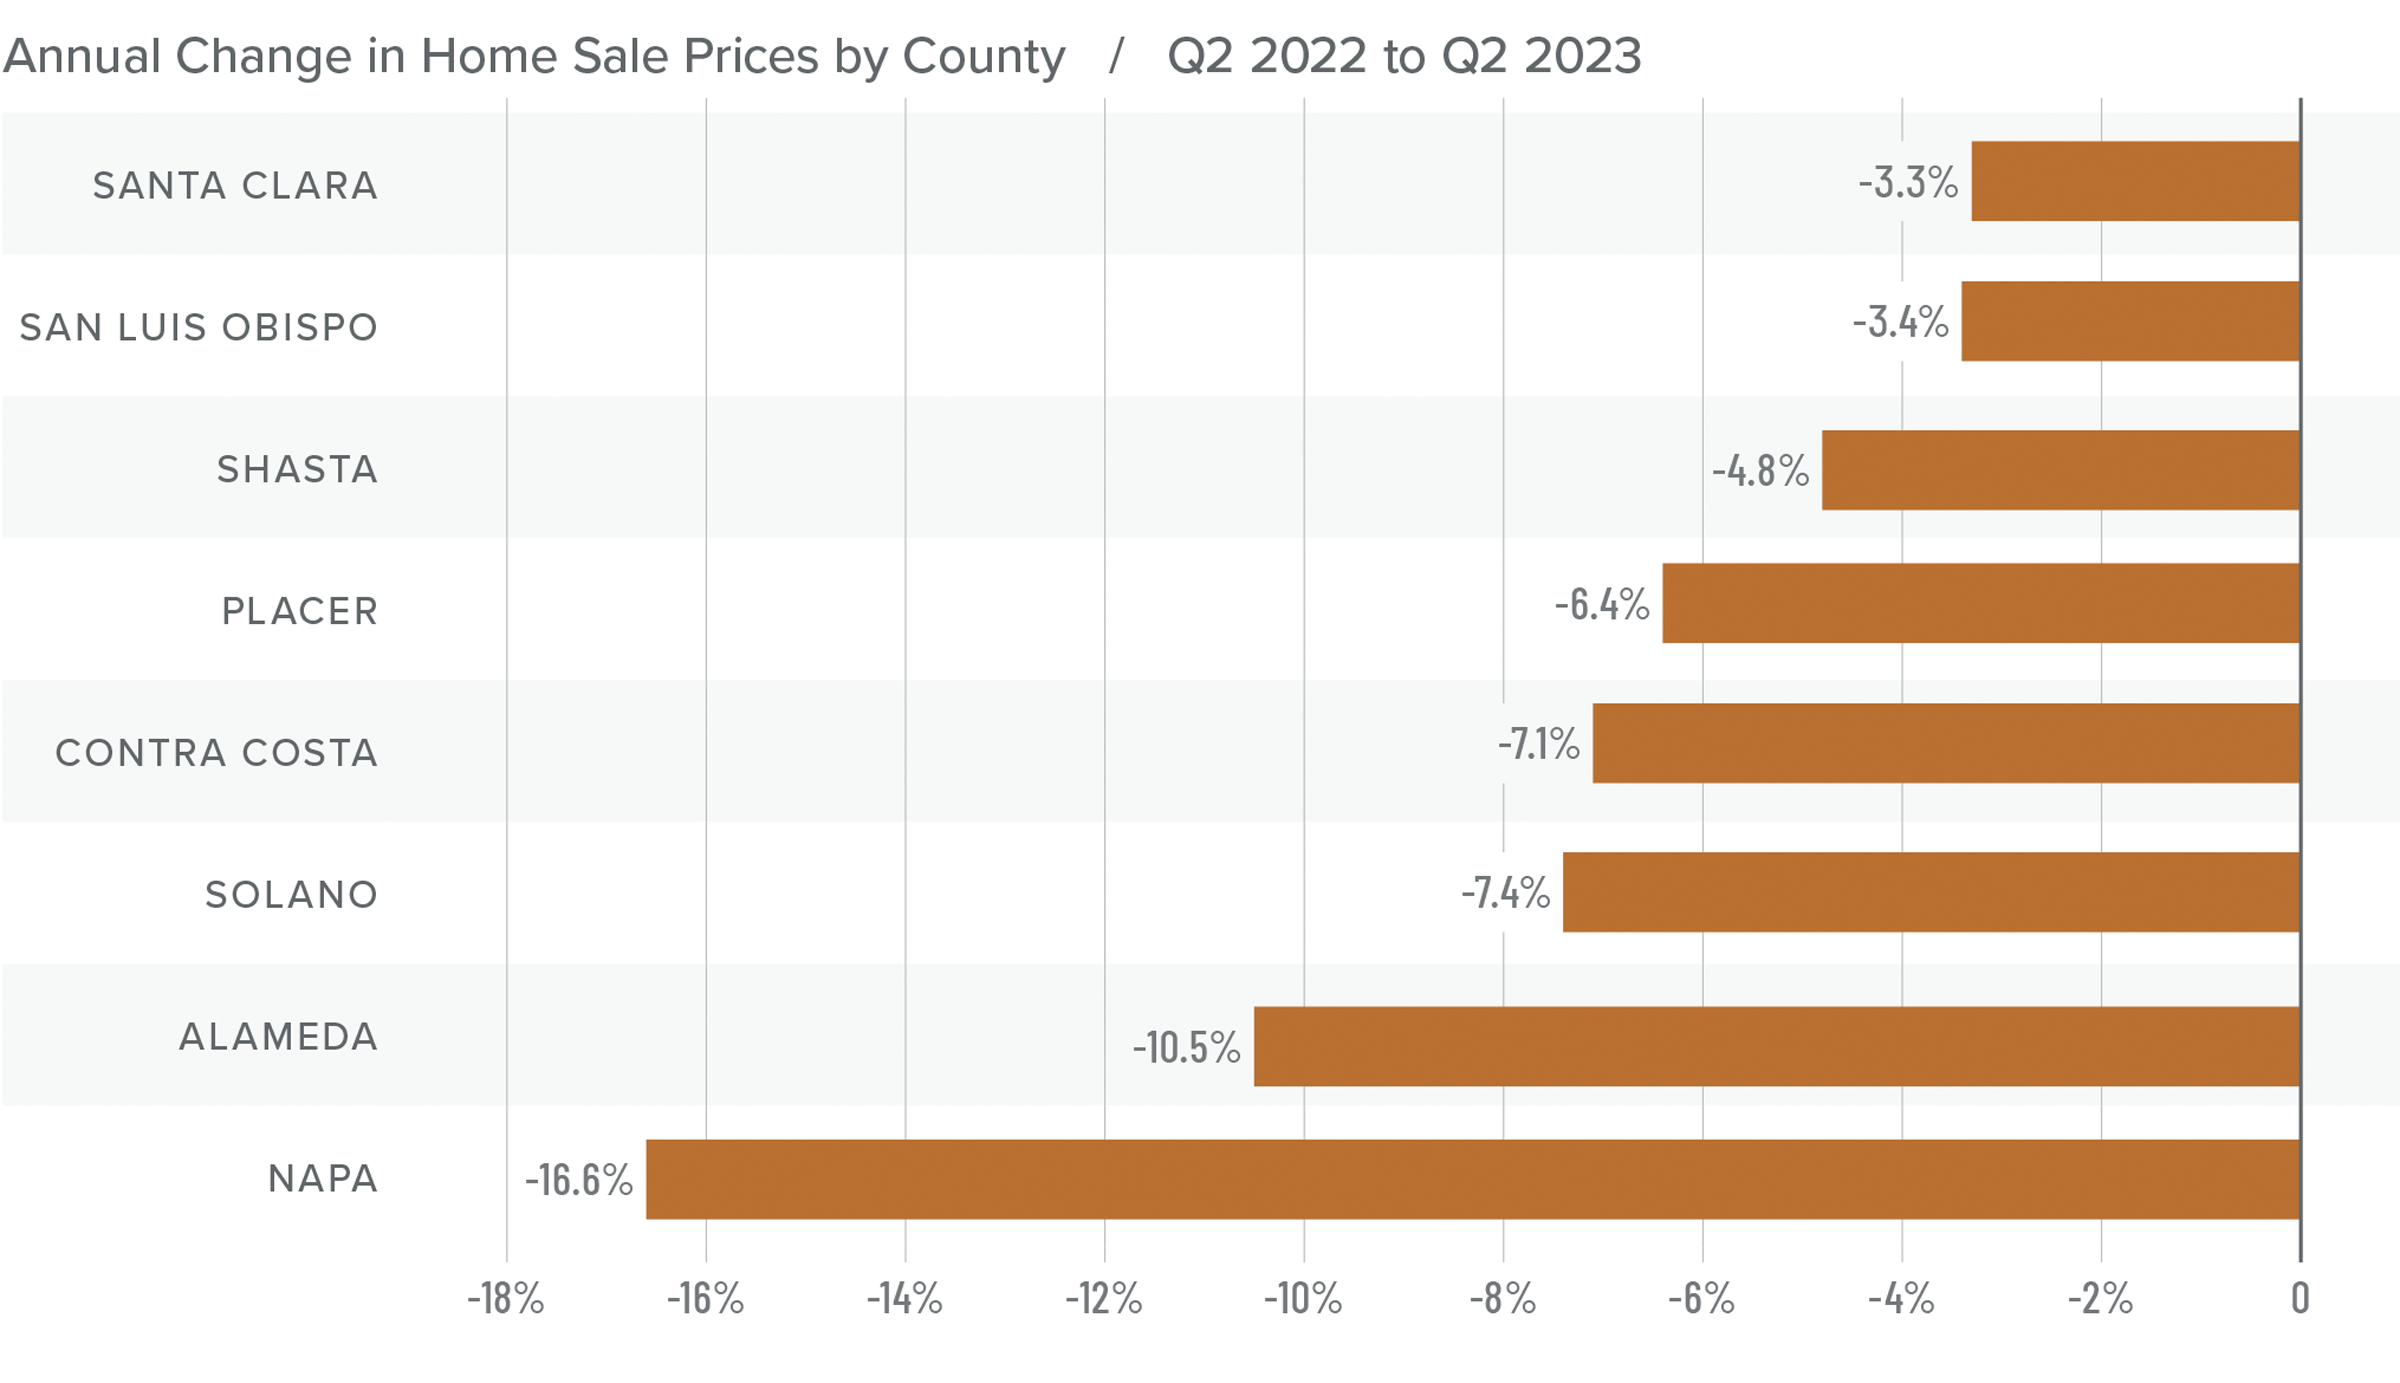 A bar graph showing the annual change in home sale prices by county in Northern California from Q2 2022 to Q2 2023. Santa Clara County tops the list at -3.3%, while Napa County had the greatest decline at -16.8%. Contra Costa and Solano Counties were toward the middle at around -7%.